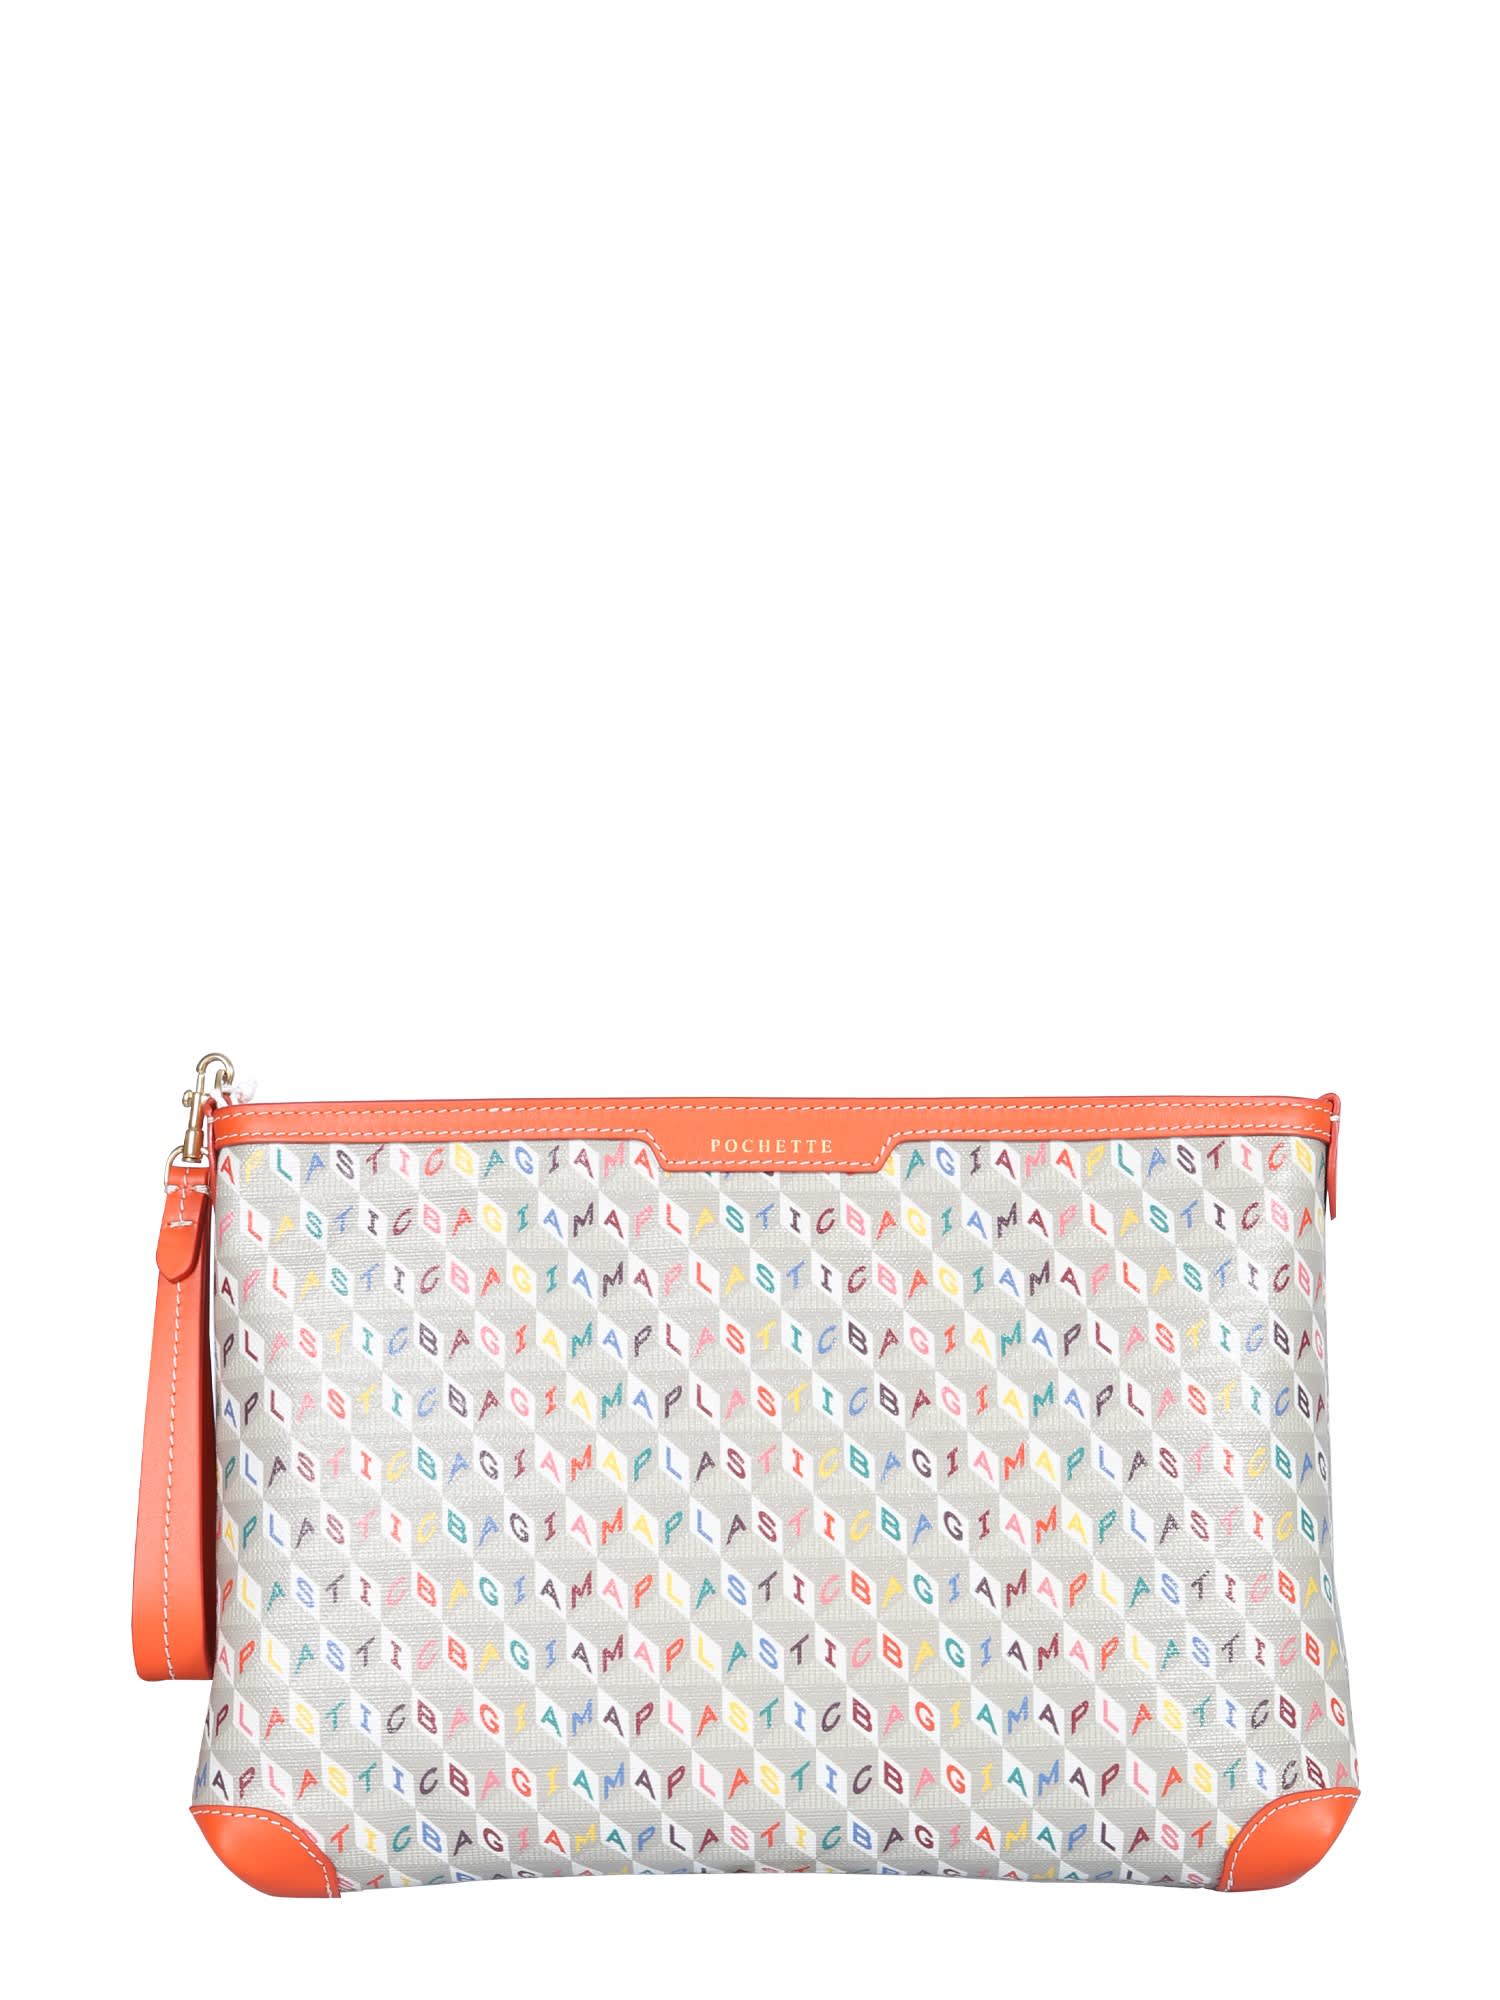 Anya Hindmarch Pouchette With Print